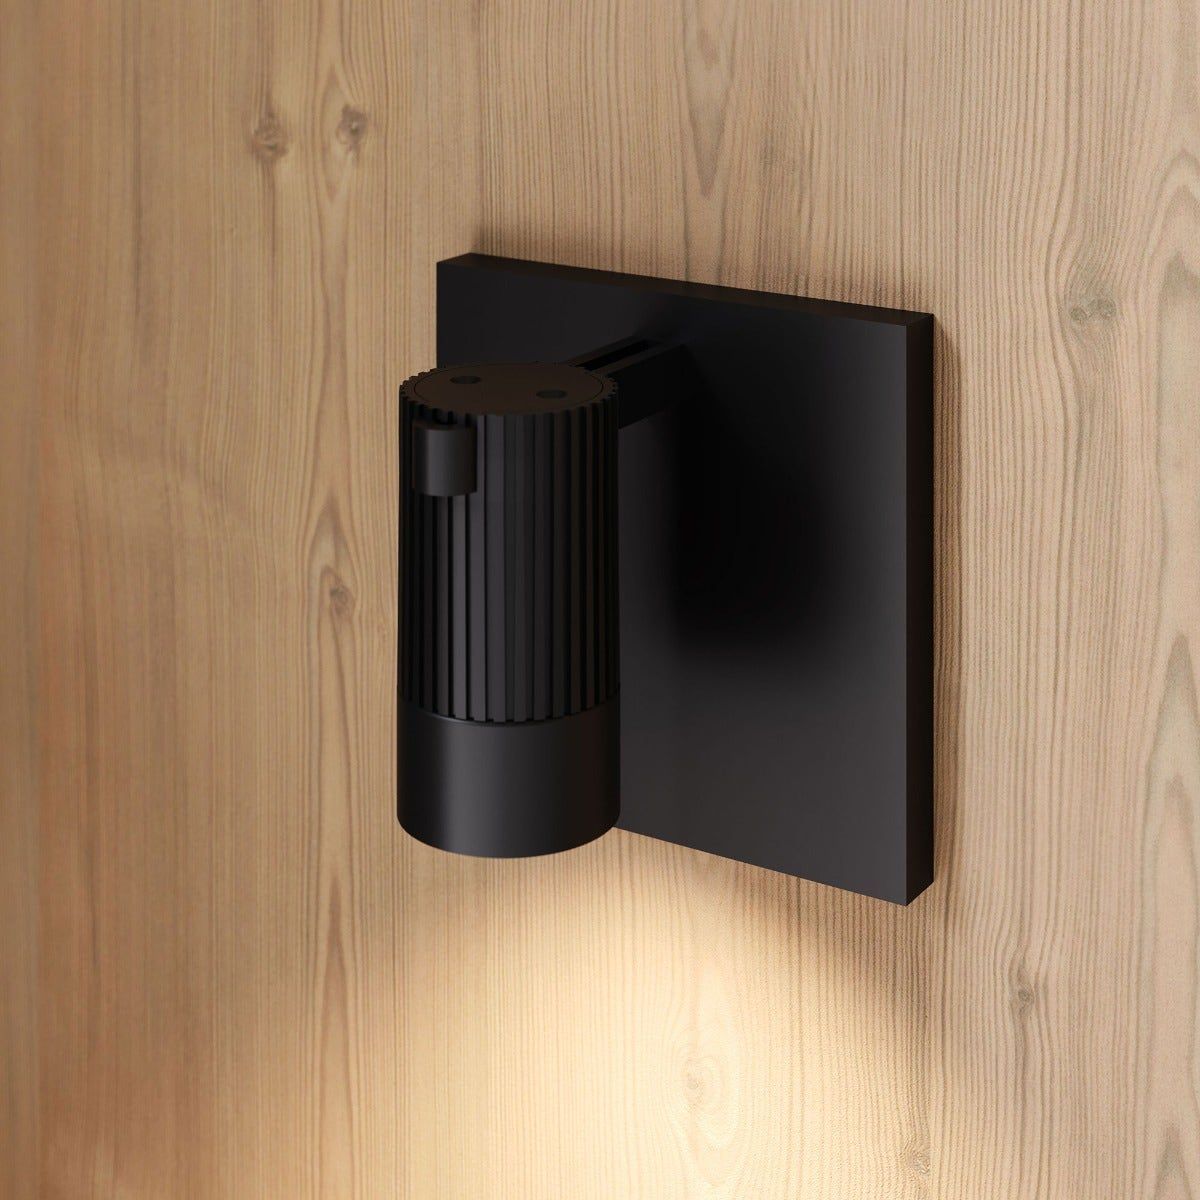 Suspenders Standard Single Sconce with Bar-Mounted Single Cylinder with Snoot Flood Lens